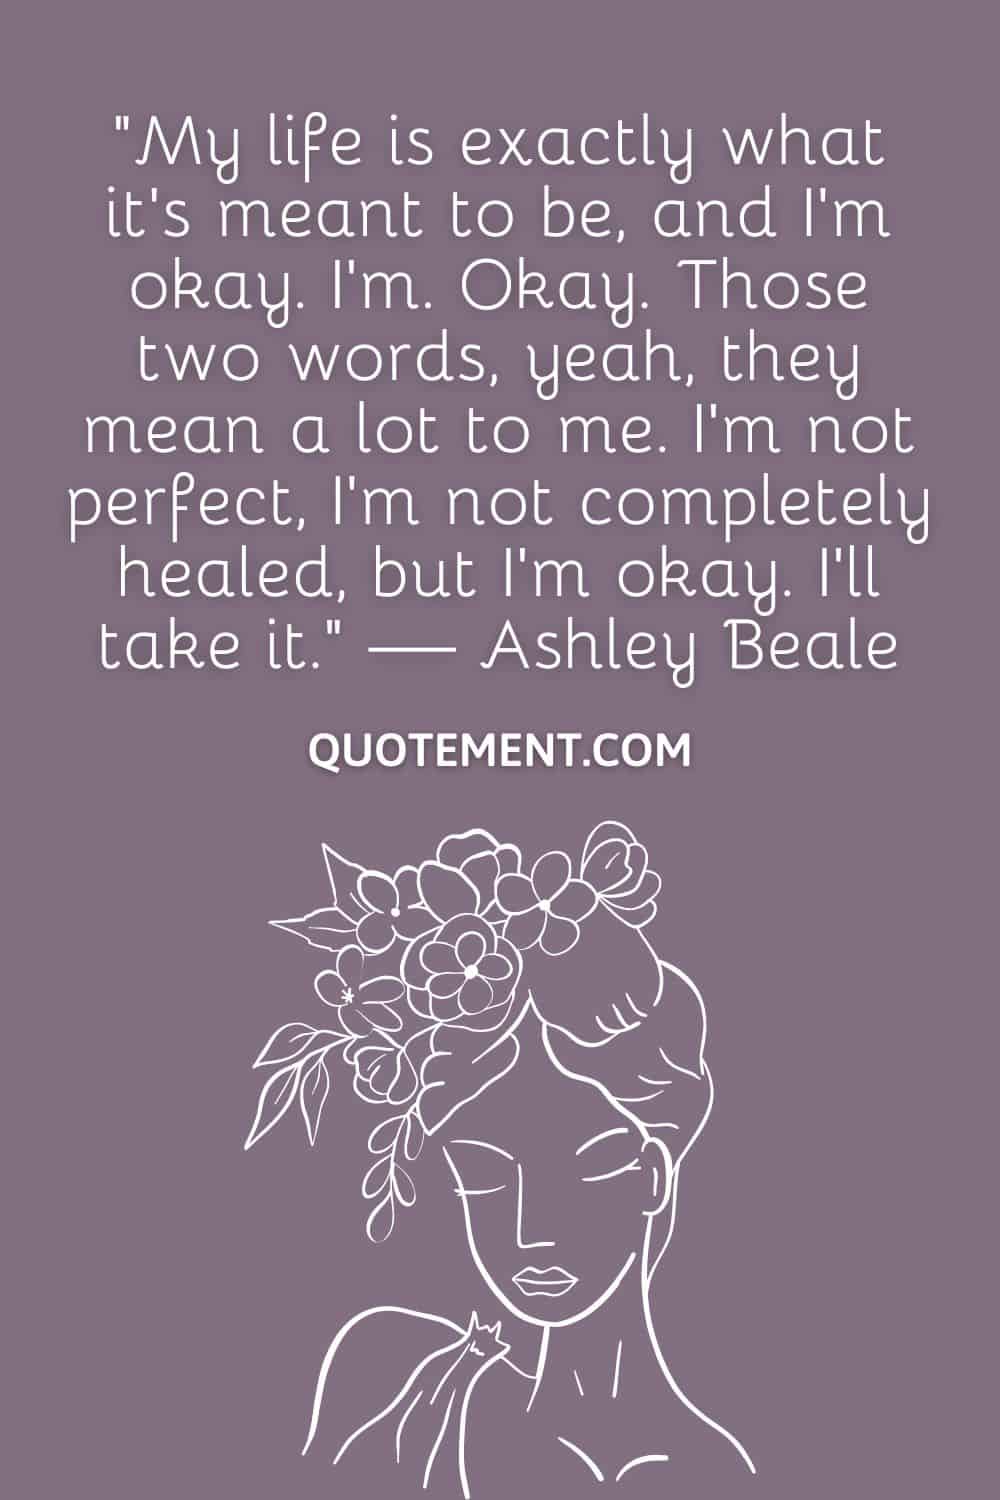 My life is exactly what it's meant to be, and I'm okay